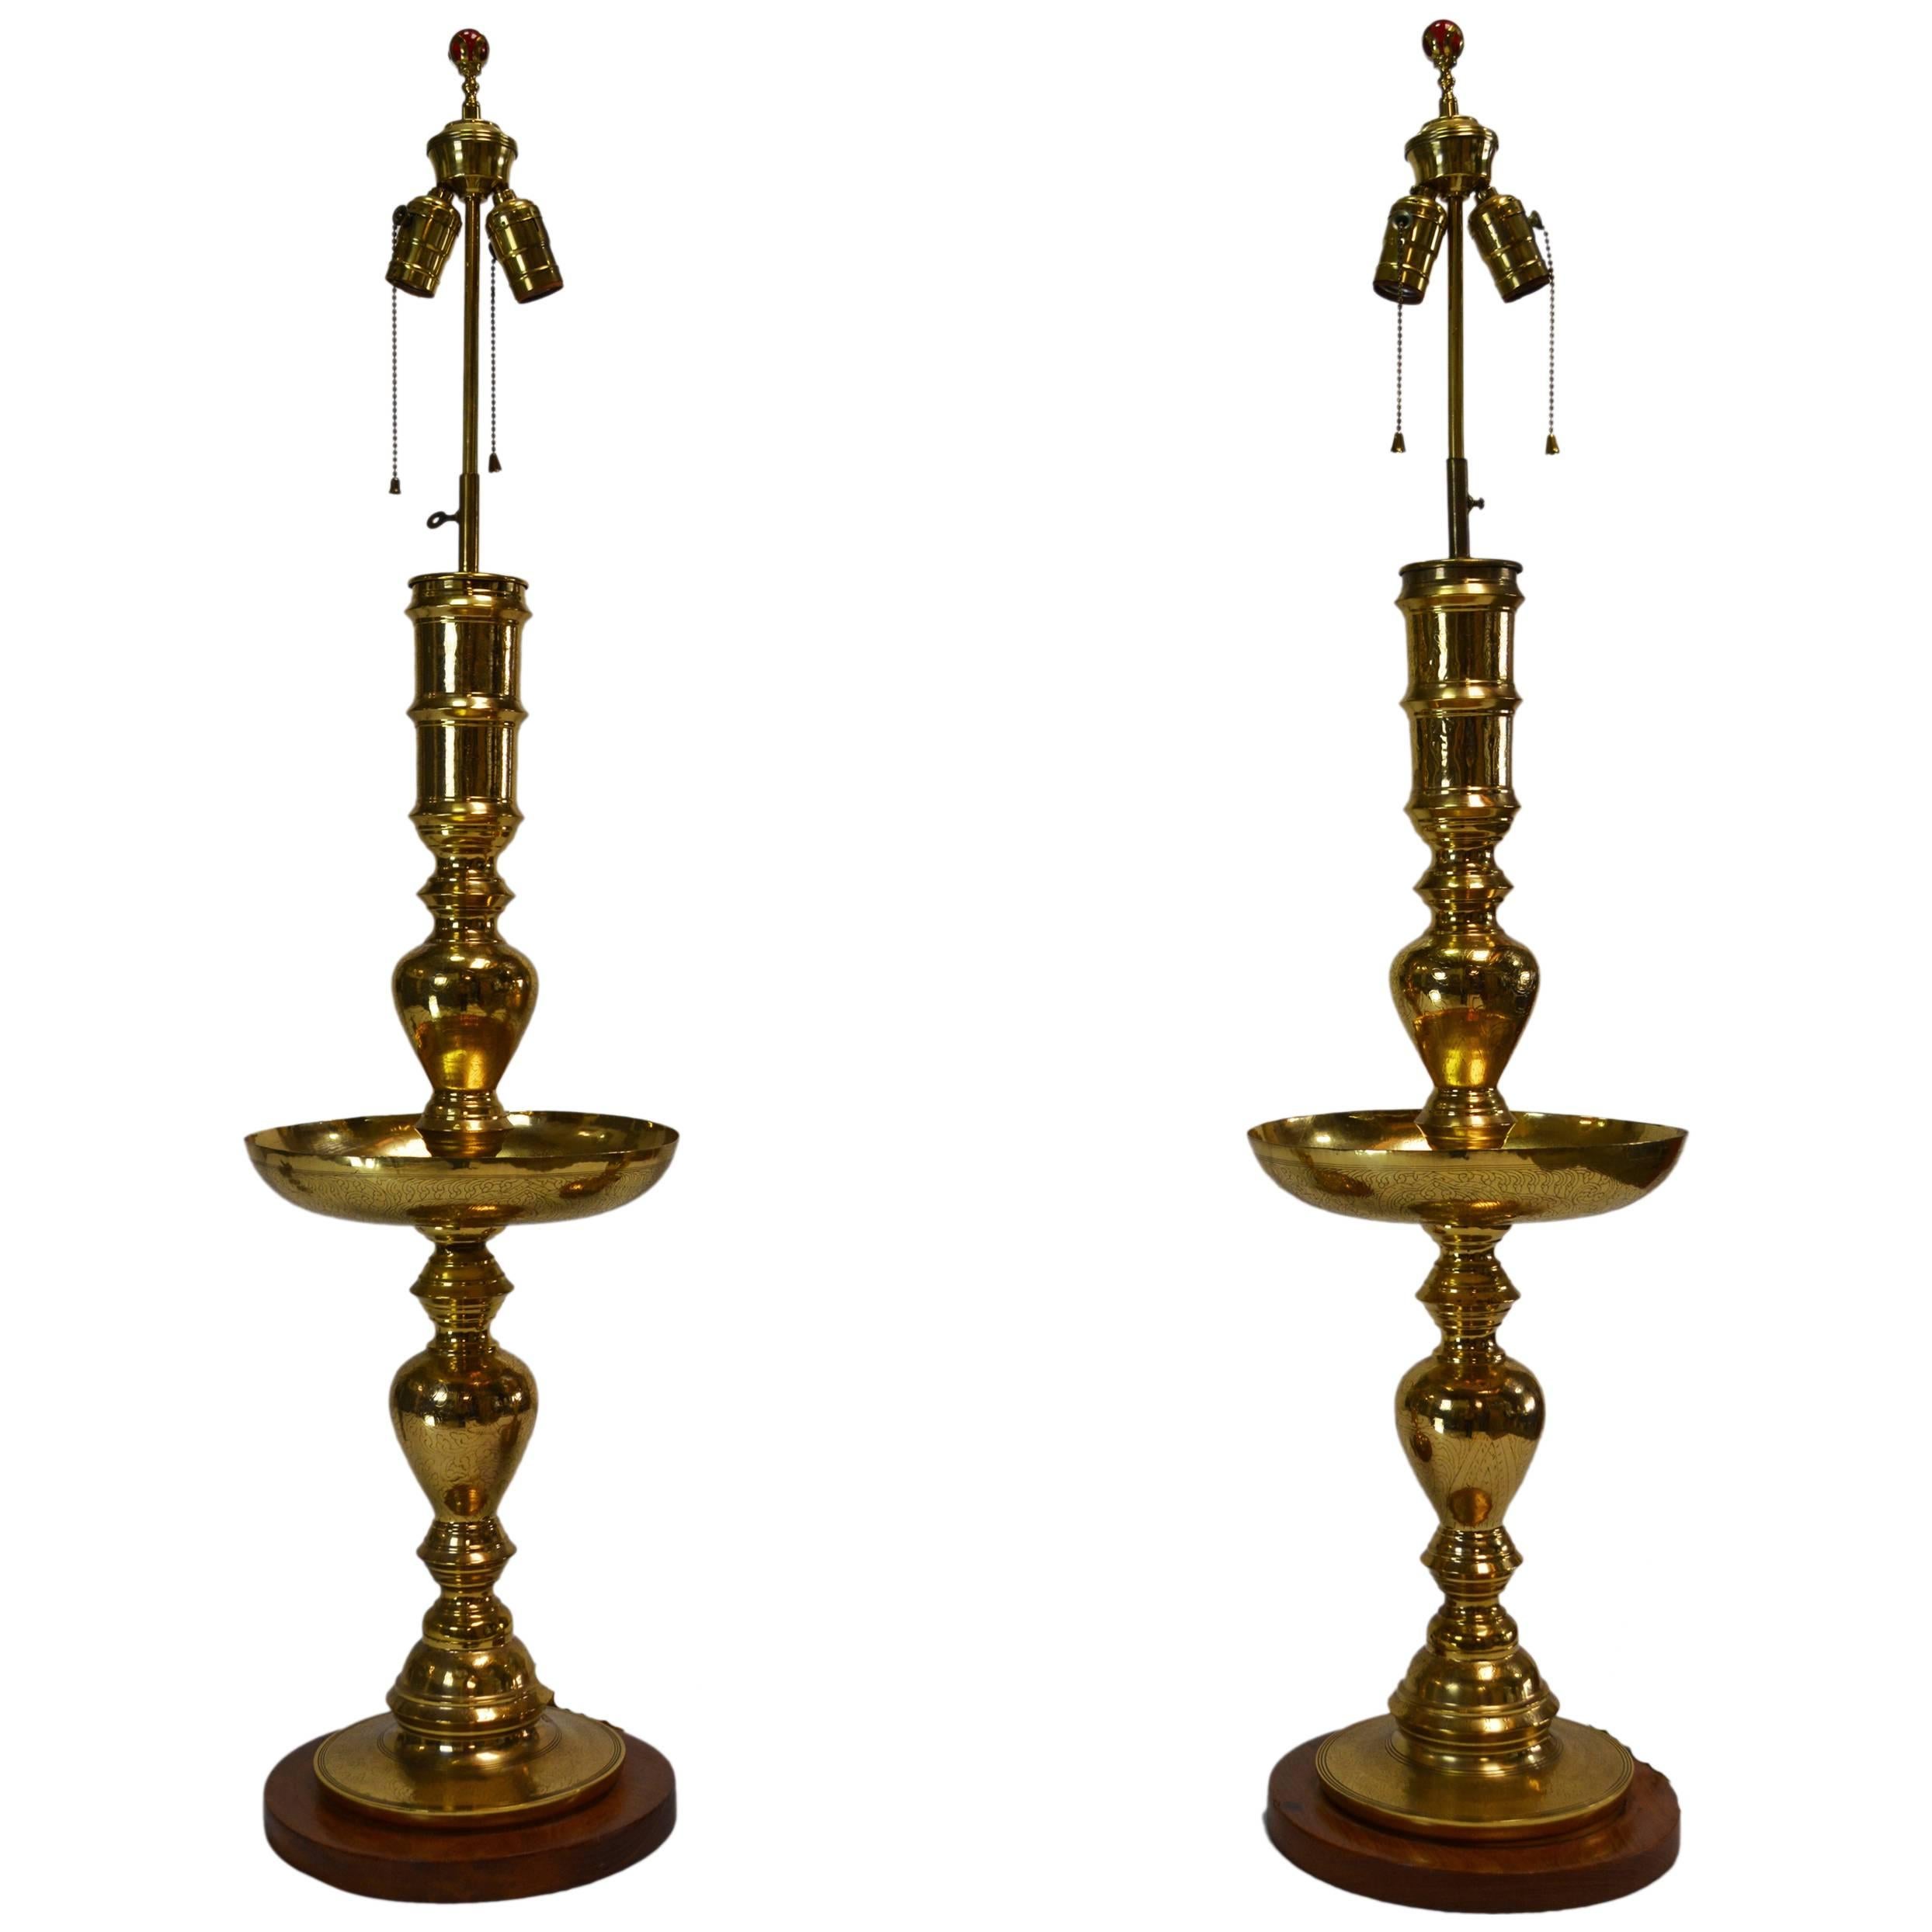 Pair of Vintage Moroccan Brass Candlestick Lamps